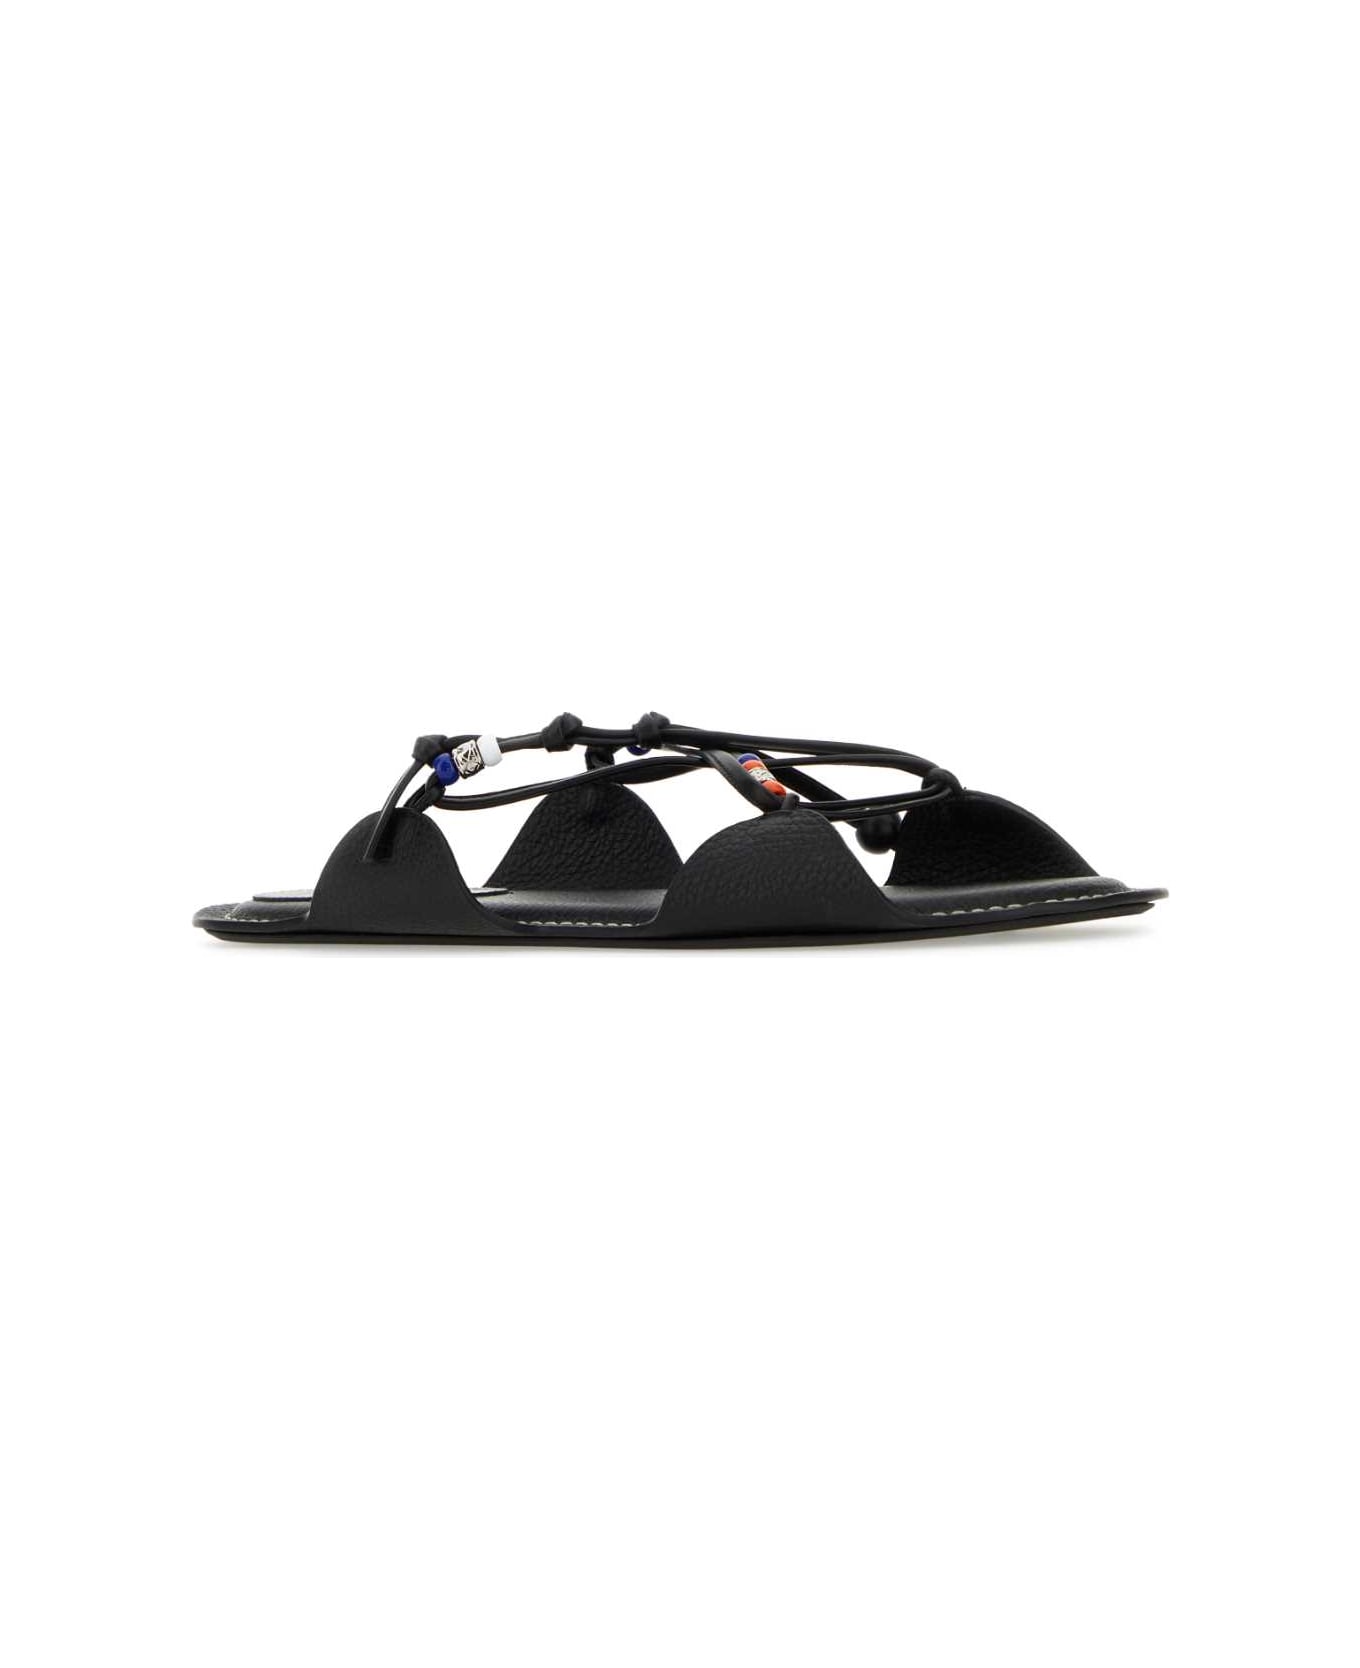 Marni Black Leather Slippers - 00N99 その他各種シューズ